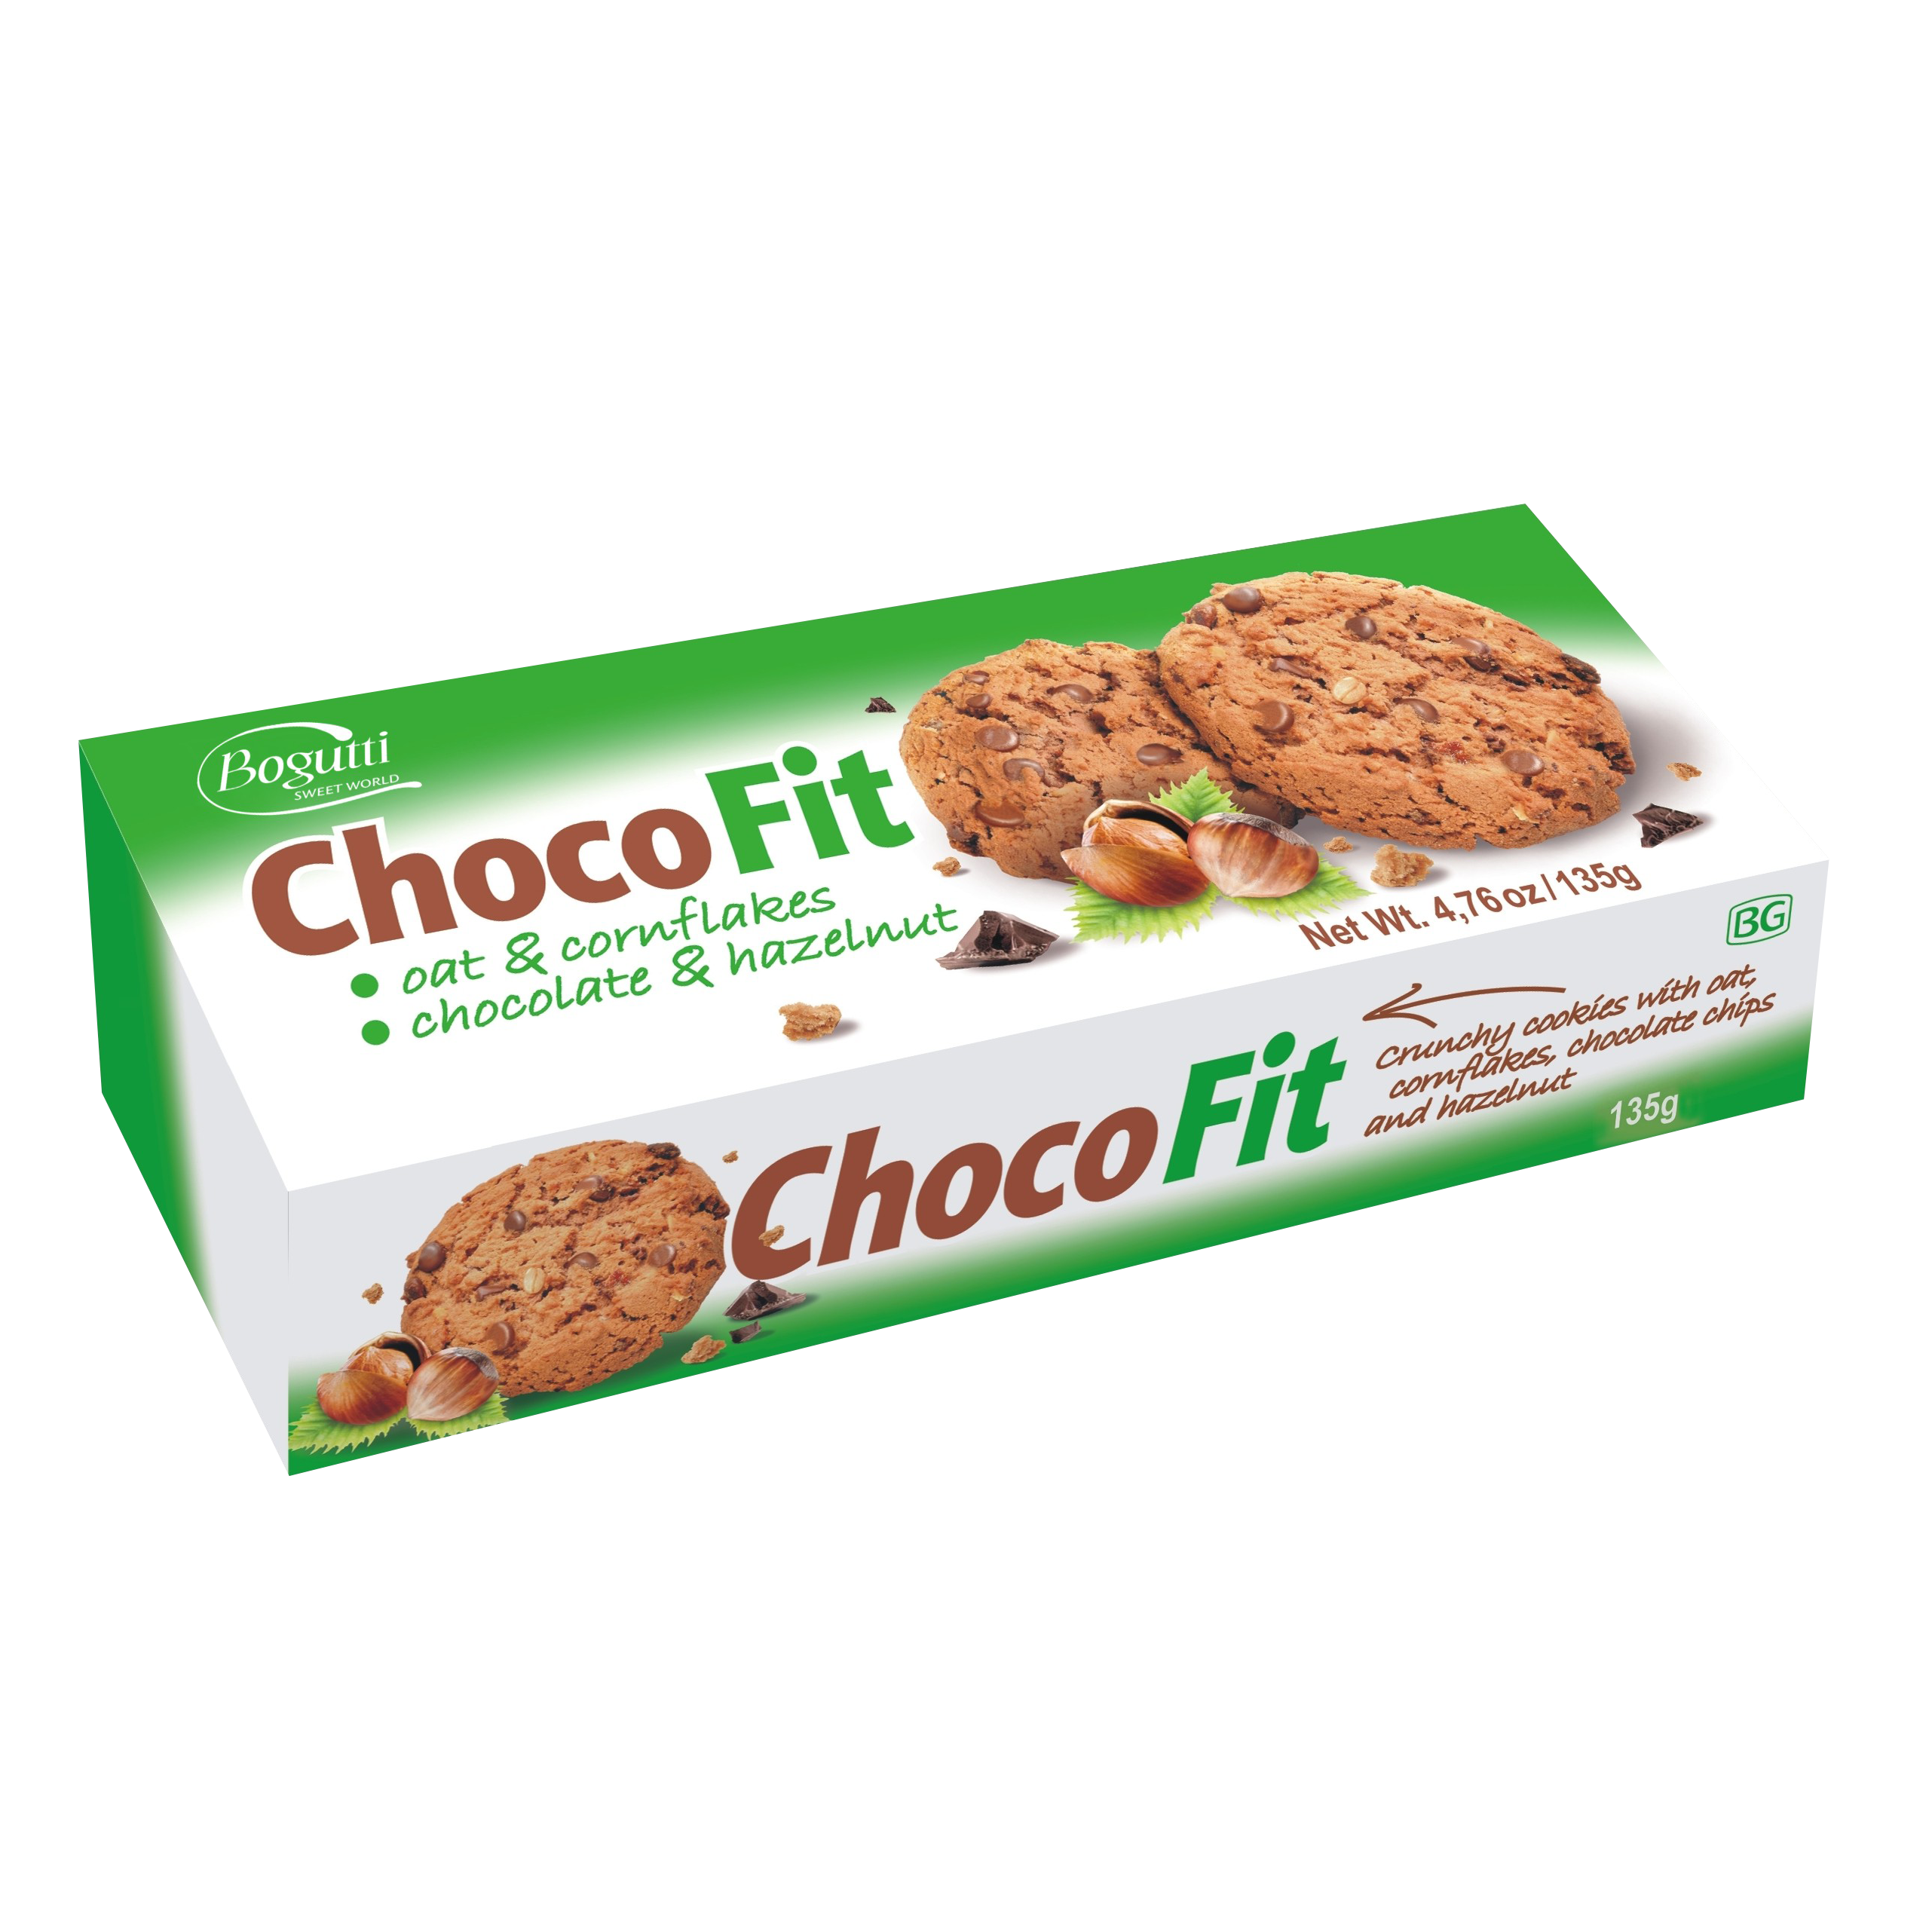 Choco Fit – Crunchy cookies with oatflakes, cornflakes, chocolate and hazelnuts